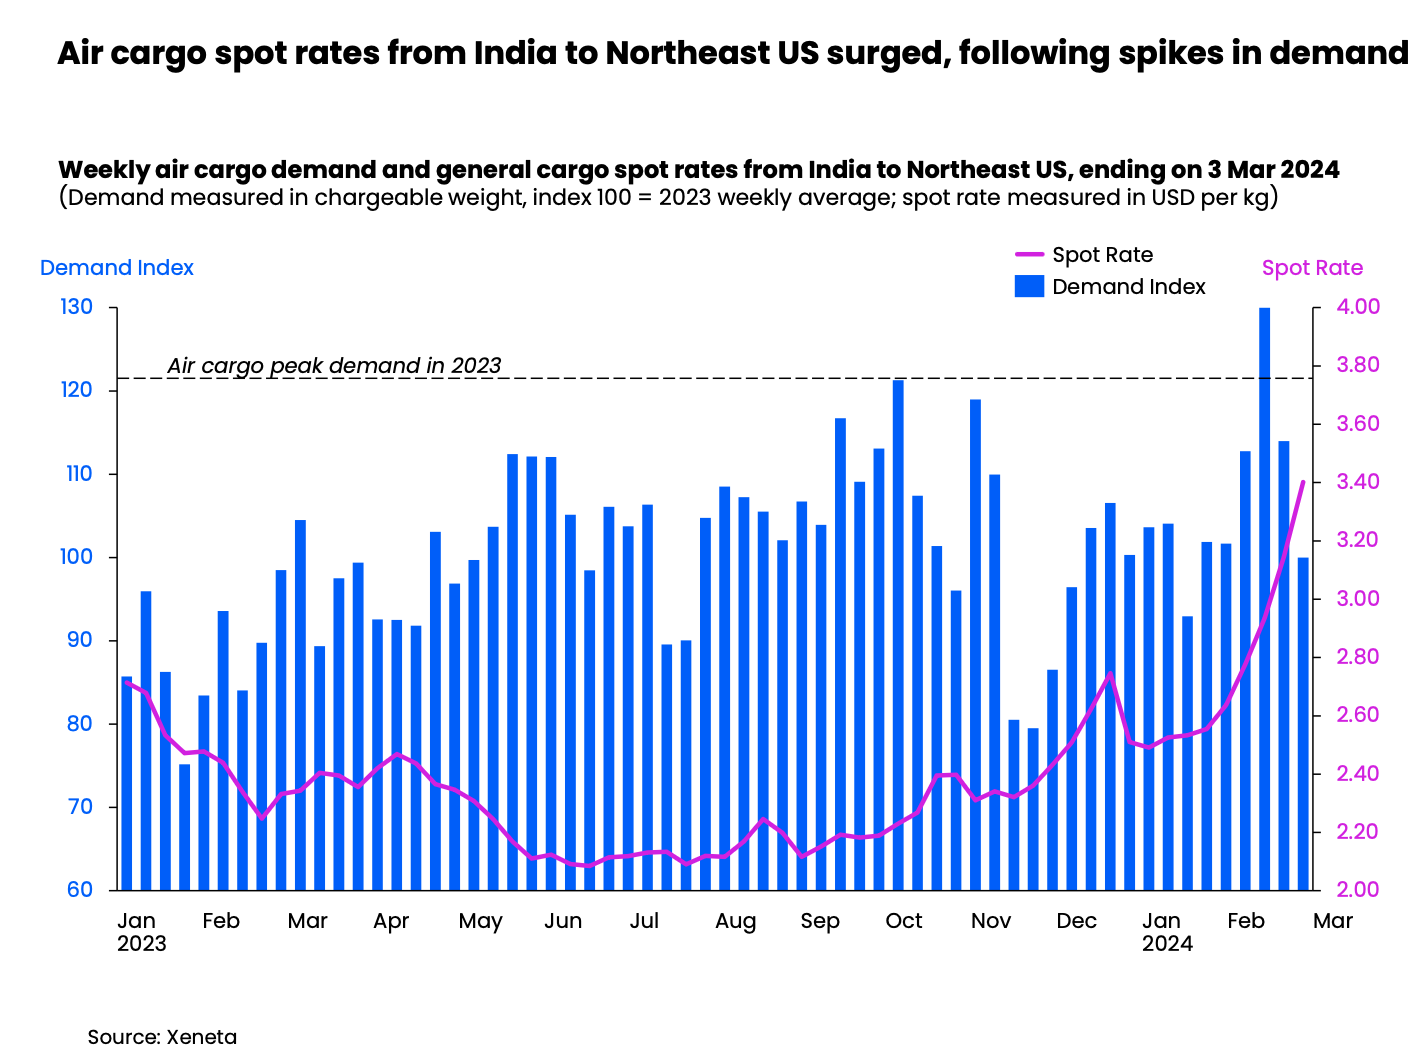 Air cargo spot rates from India to Northeast US surged, following spikes in demand